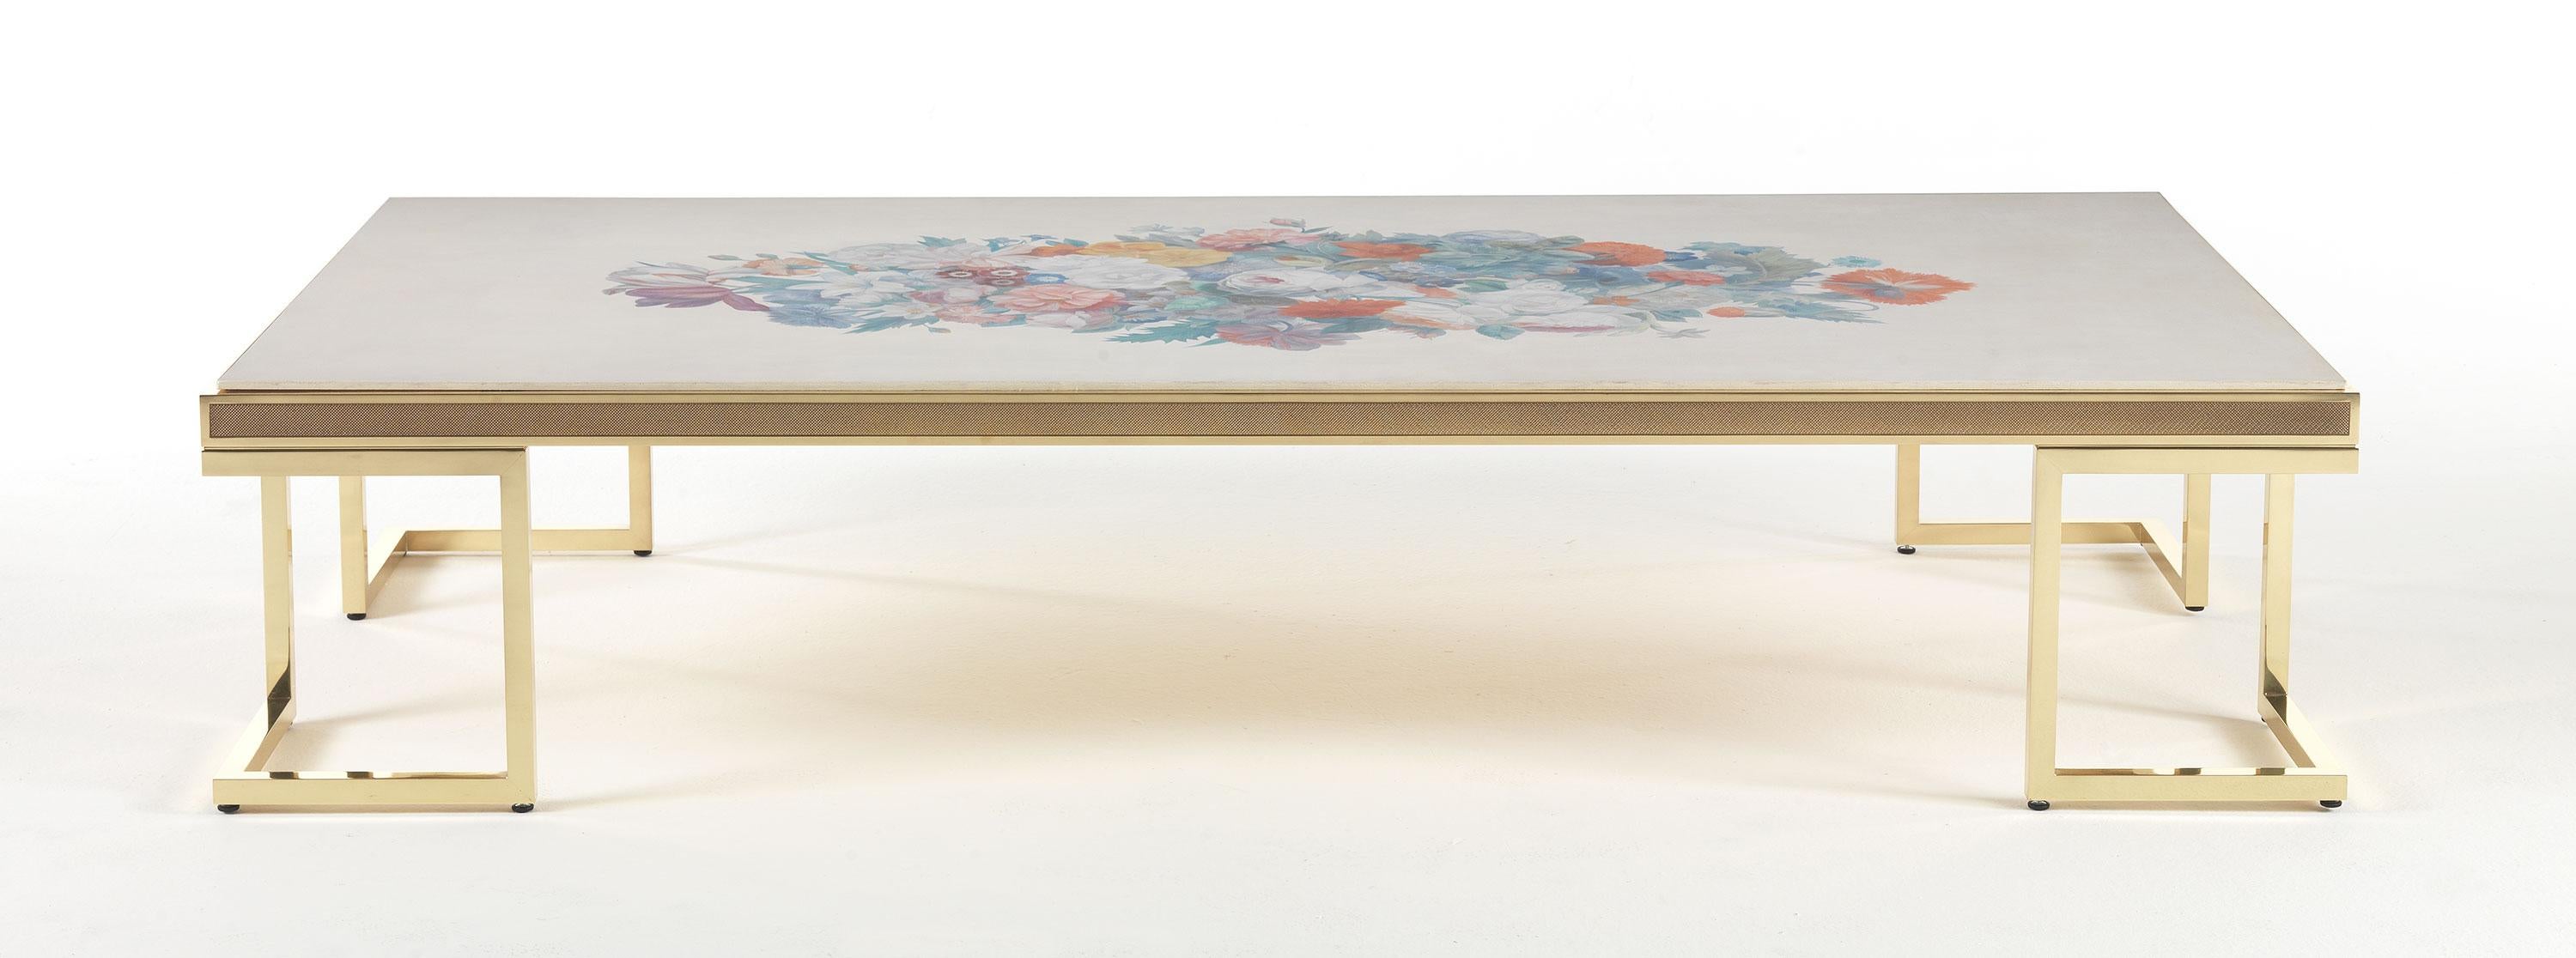 The hand painted top with Flemish style floral pattern is the main feature of the Folies table. A detail that recounts the decorative spirit that features Jumbo Collection and a demonstration of its craftsmanship and artistic skills.
Folies Central